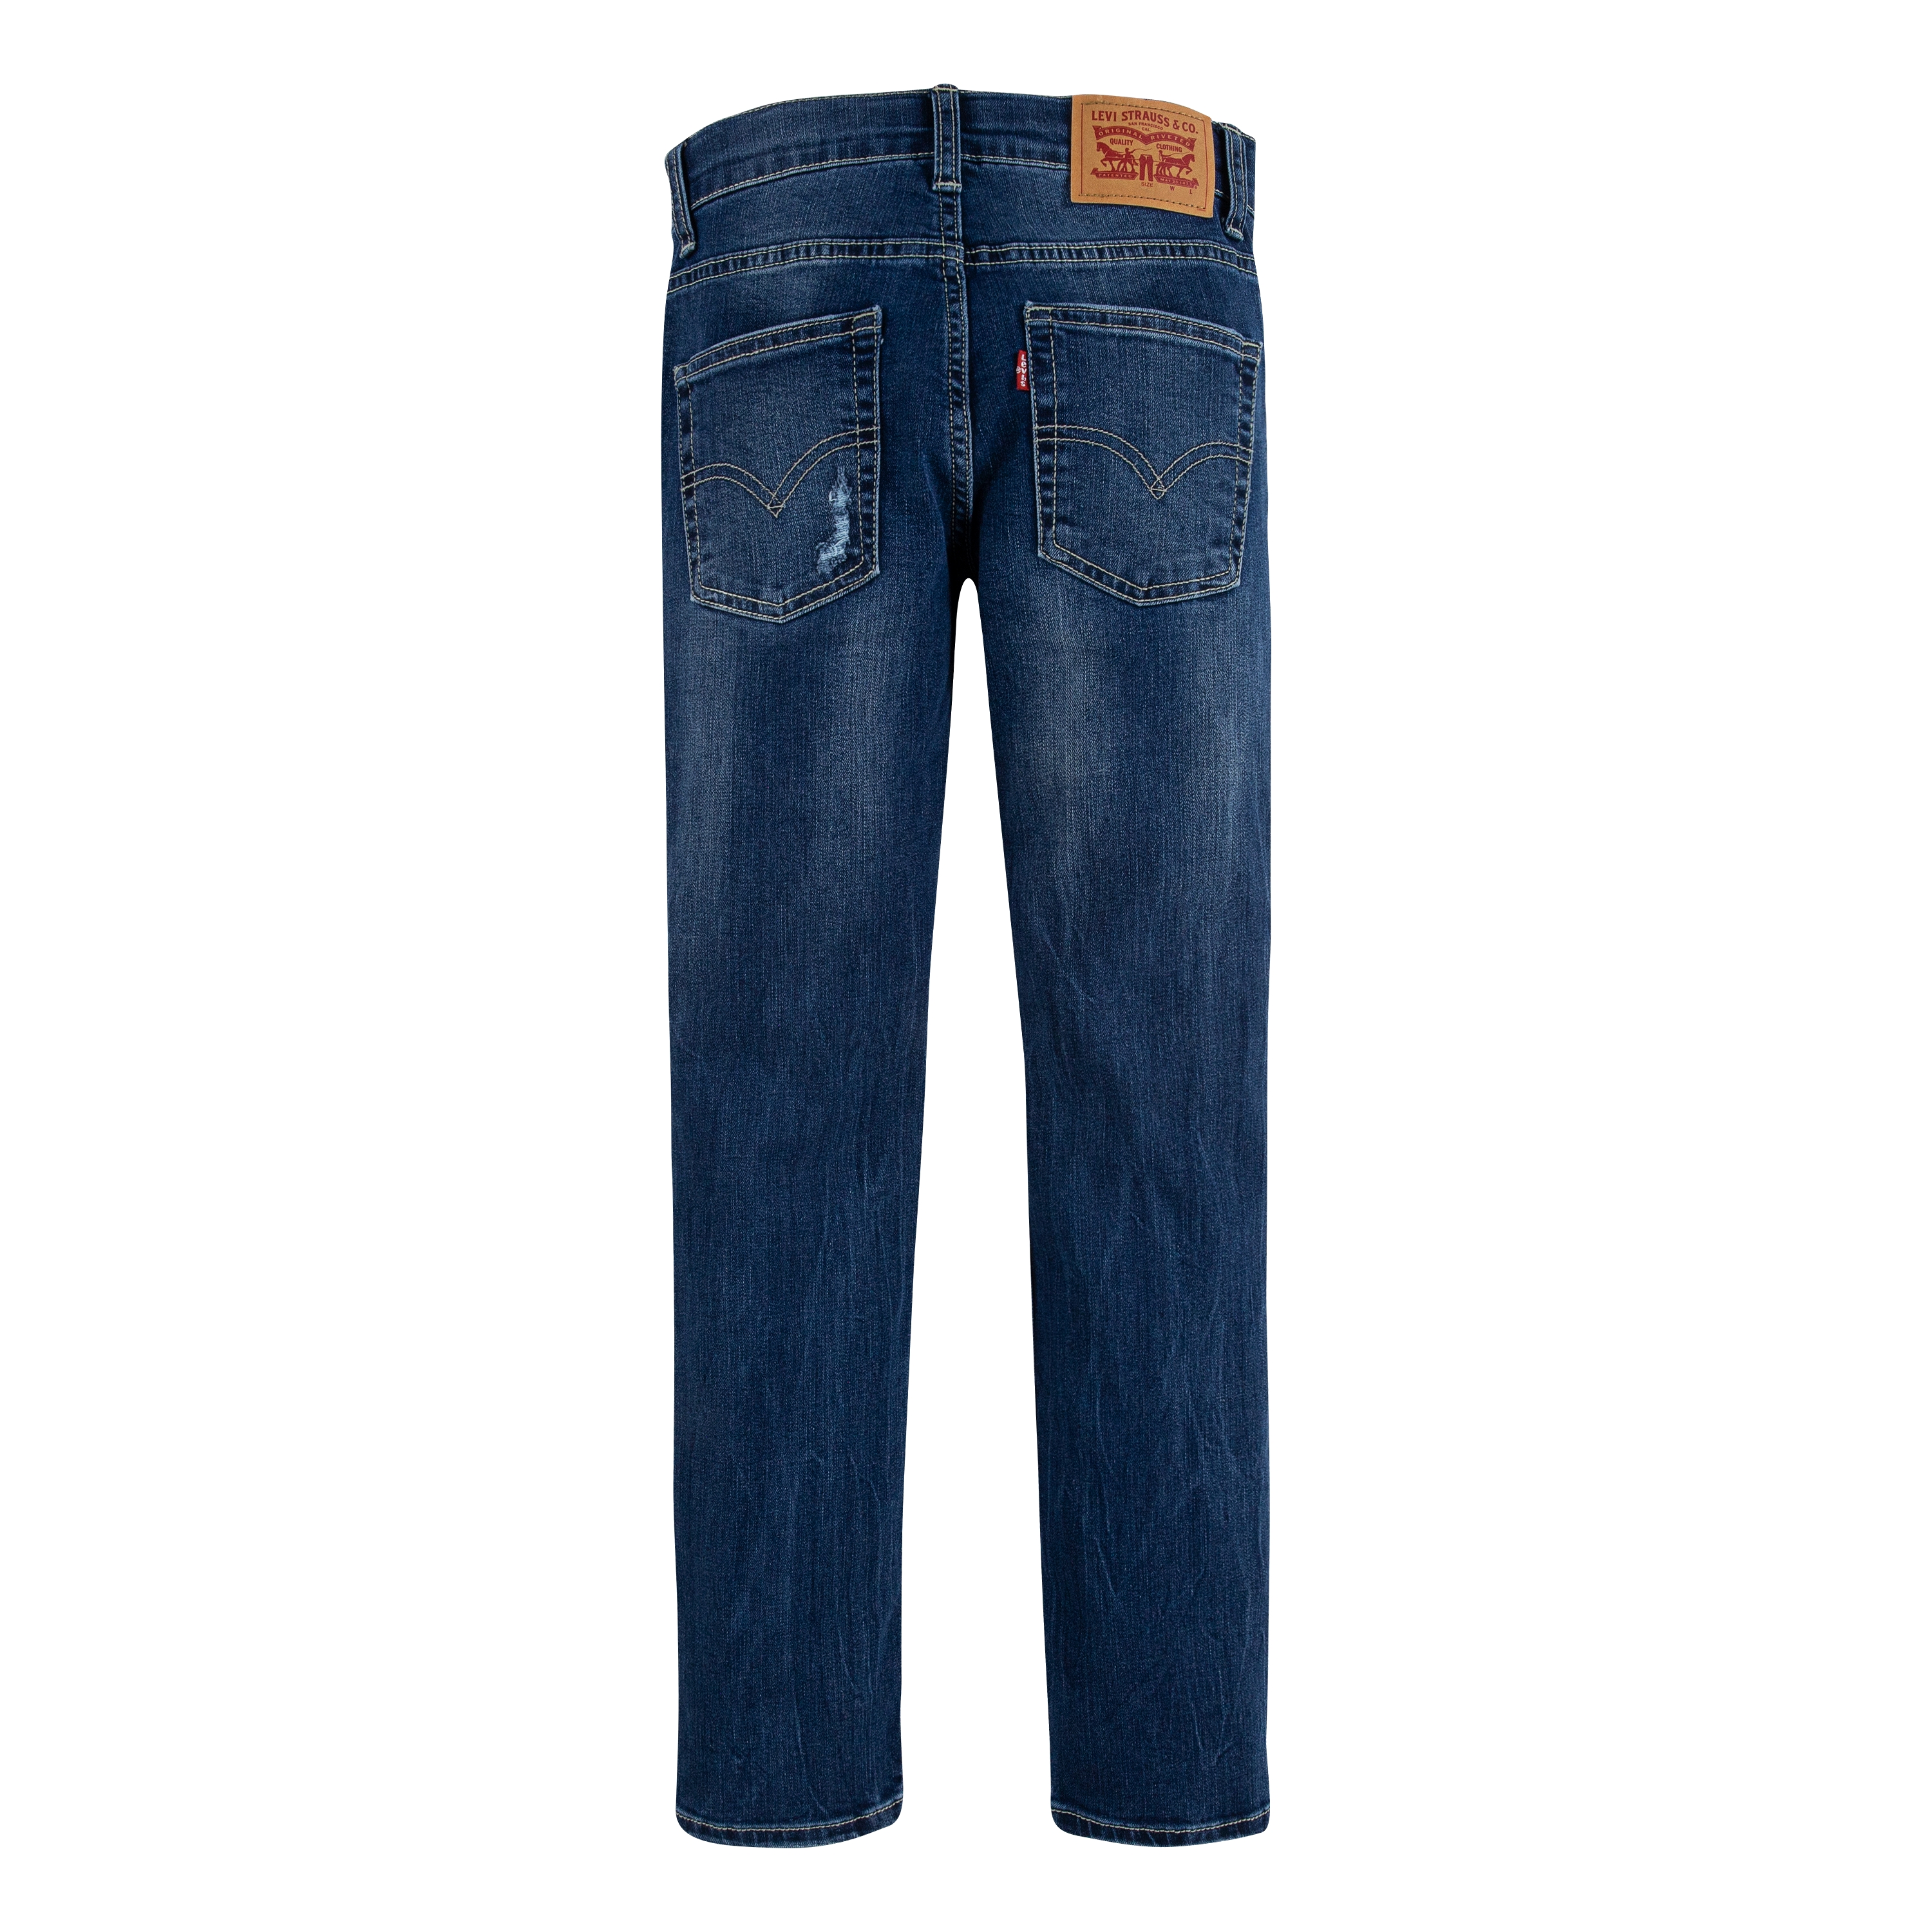 Levi's Boys' 510 Skinny Fit Performance Jeans, Sizes 4-20 - image 2 of 9